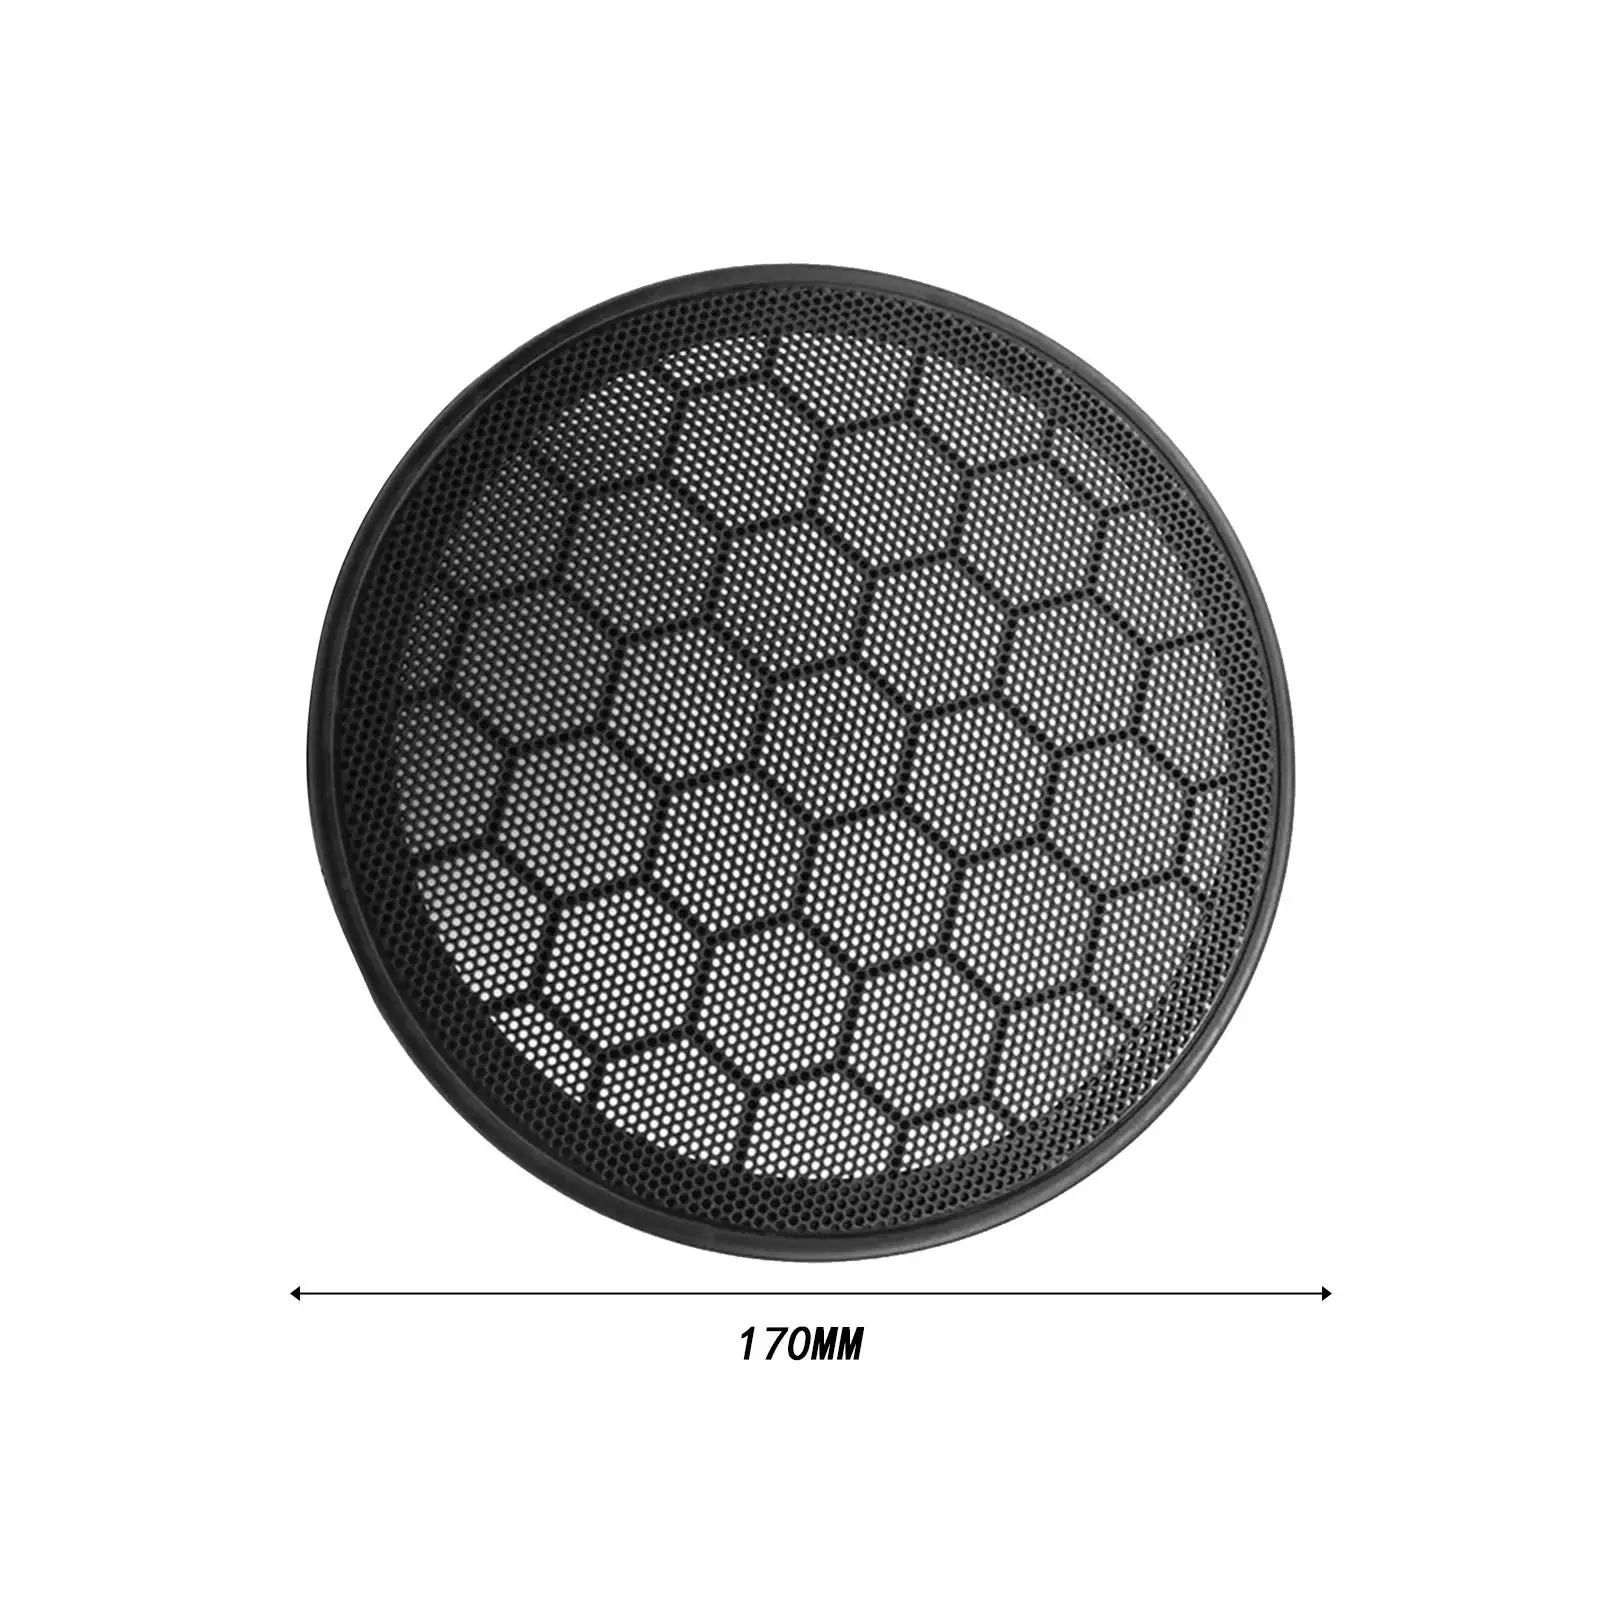 Door Speaker Cover Grill Horn Guard Protector Truck Vehicle Supplies Circle Grille Protective 3B0868149 Subwoofer Mesh Grill